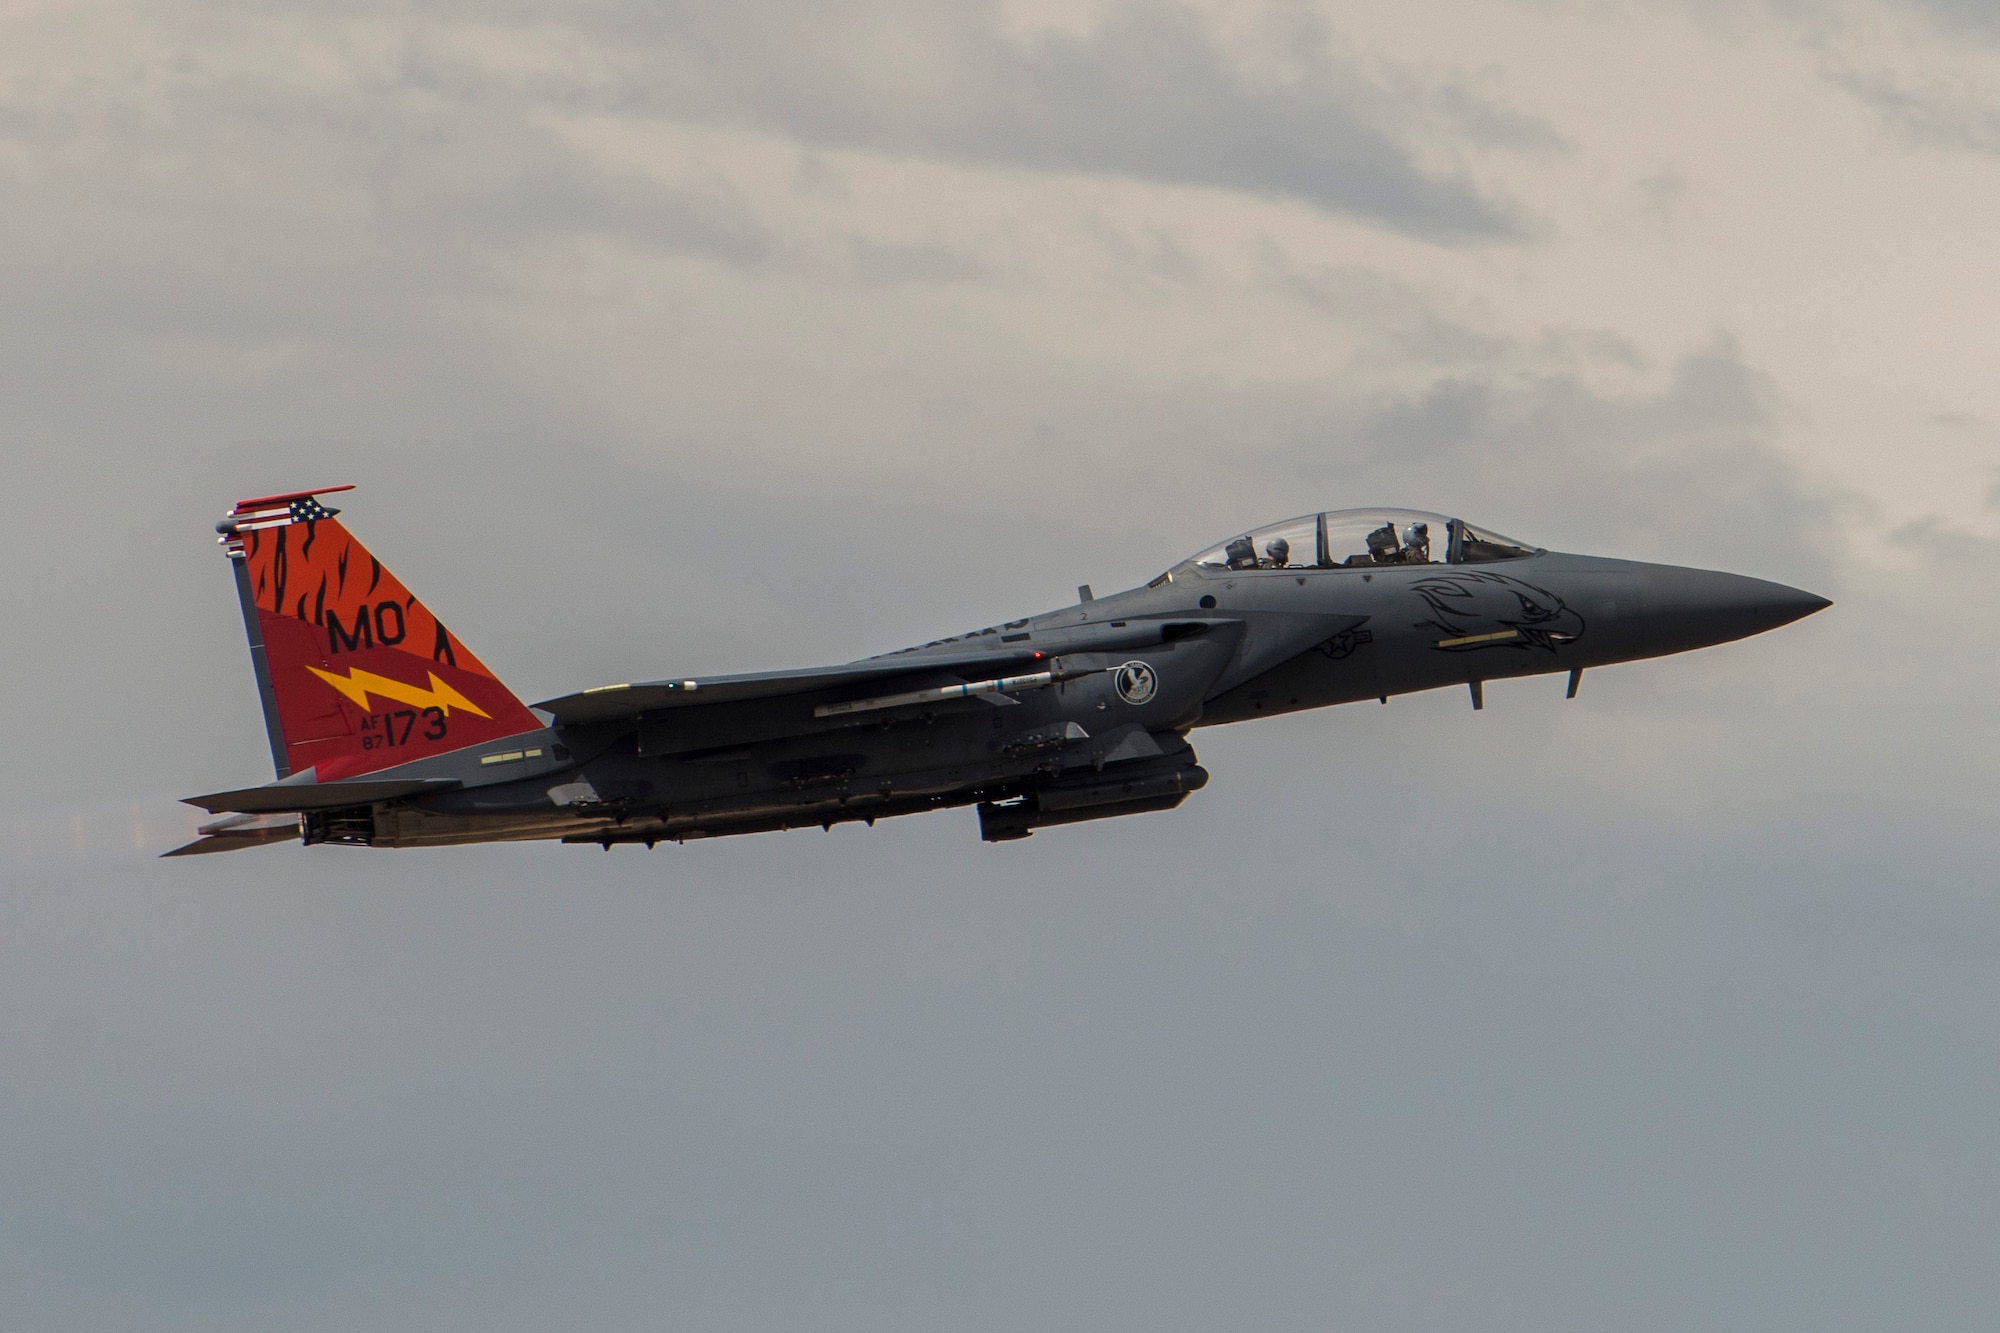 The Gunfighter Flagship F-15E Strike Eagle takes off during an exercise, May 22, 2018 at Mountain home Air Force Base, Idaho. Gunfighter Flag 18-2 encompassed both the Belgian Air Component and Idaho Civil Air Patrol. (U.S. Air Force photo by Airman 1st Class JaNae Capuno)